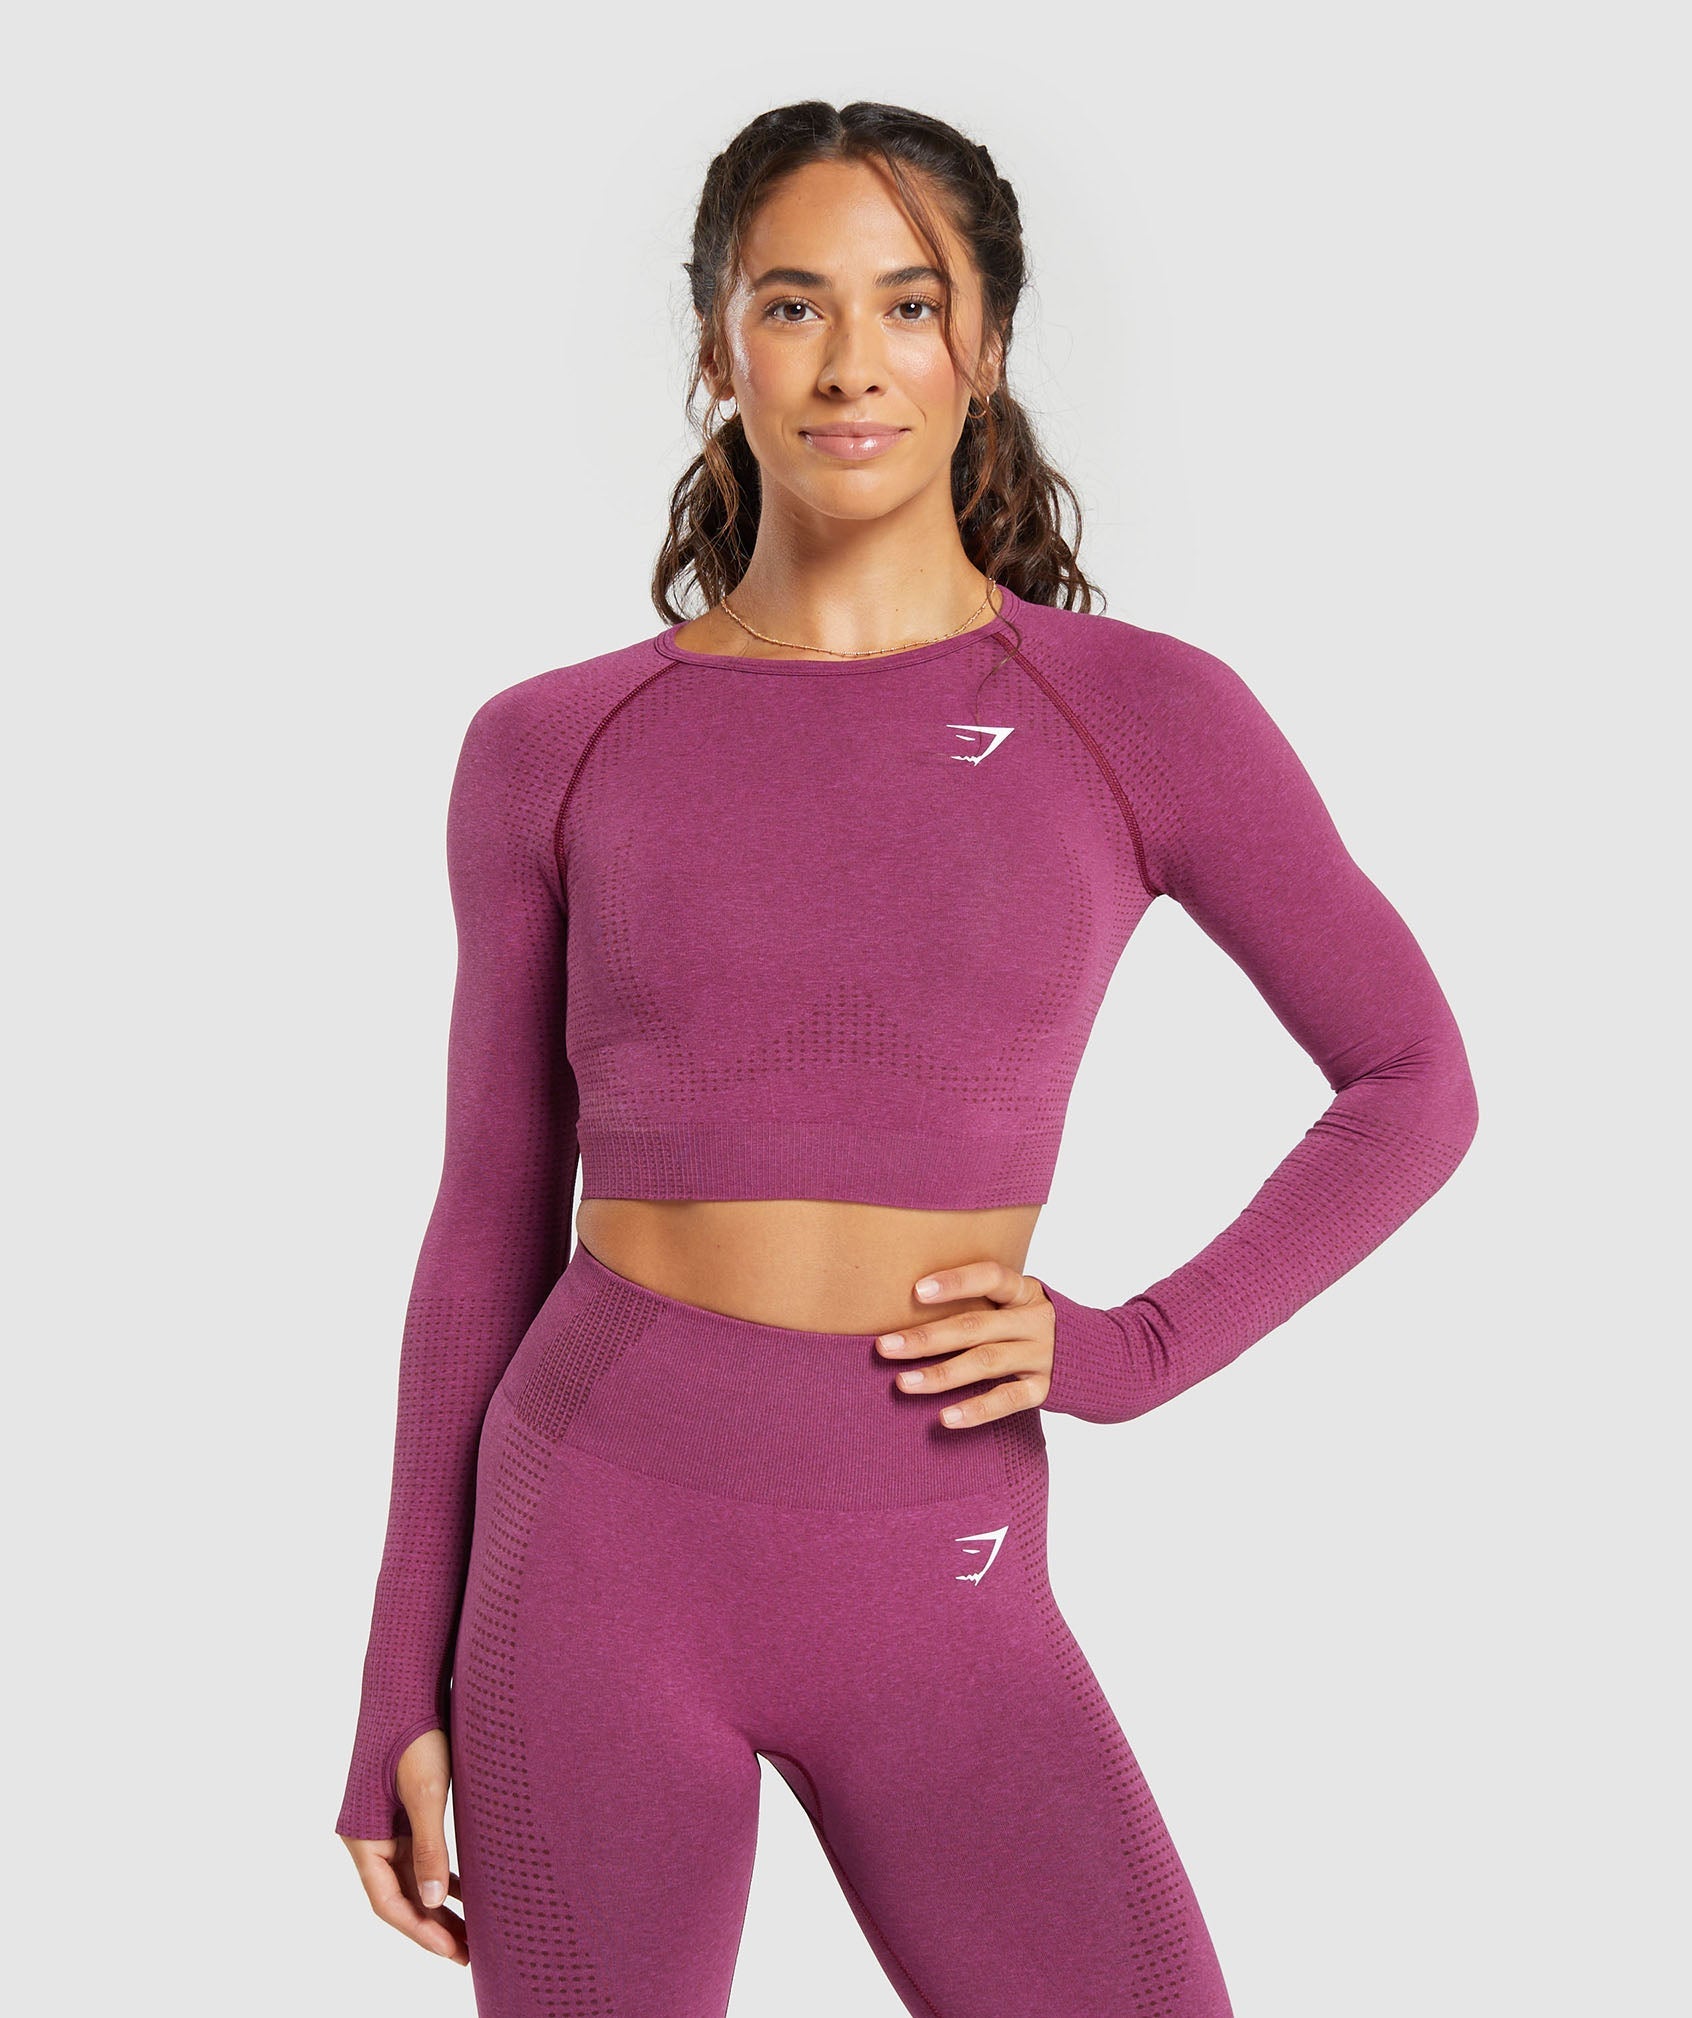 EVERYTHING MUST GO Gymshark TRAINING CROPPED - Cropped Leggings - Women's -  rose taupe - Private Sport Shop